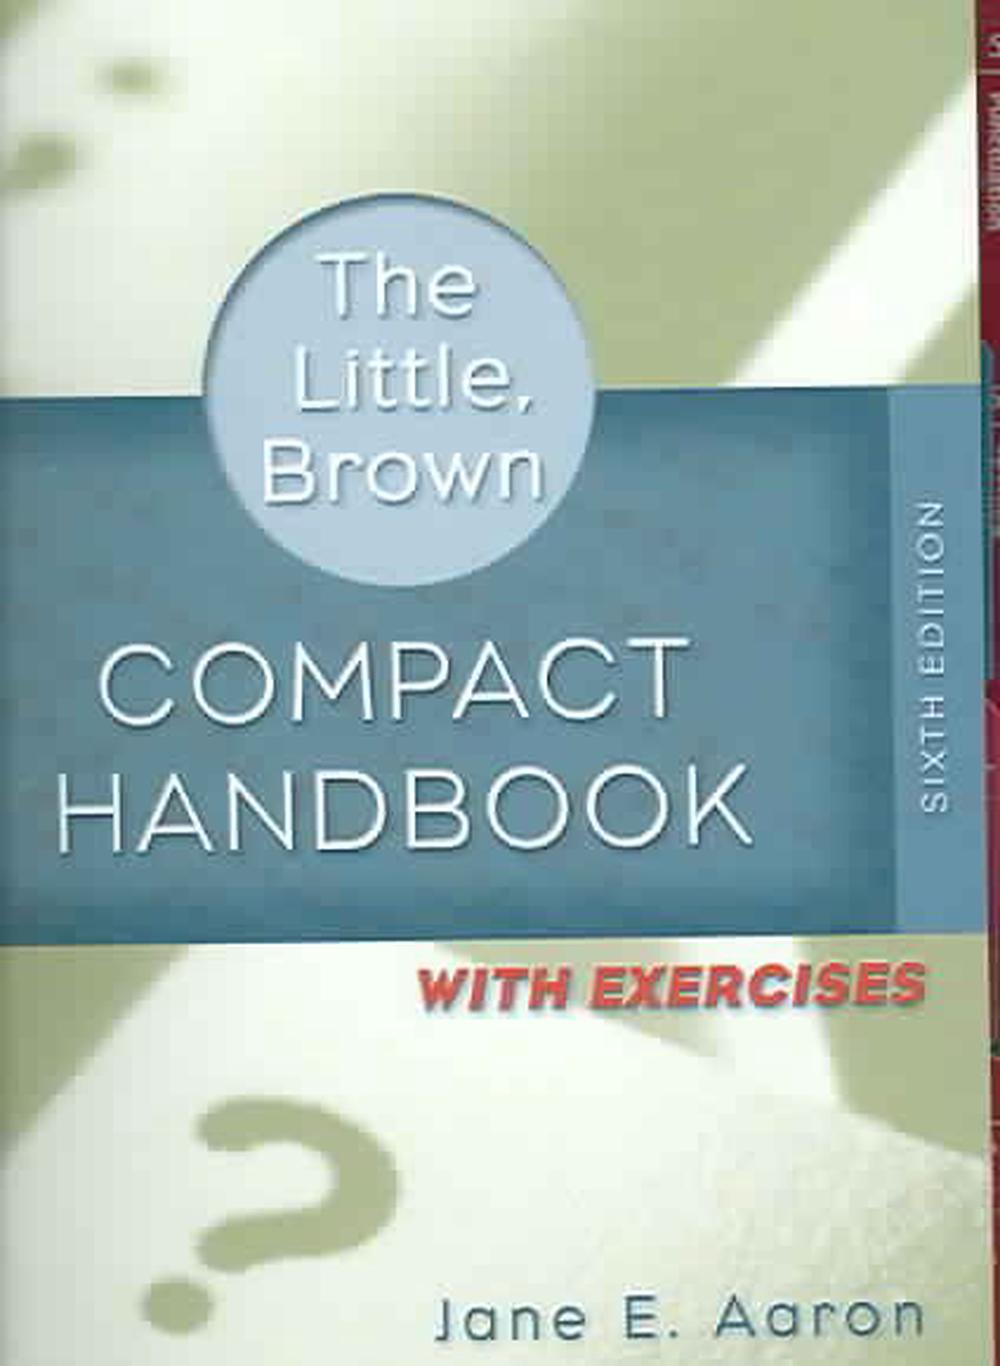 The Little, Brown Compact Handbook with Exercises by Jane E. Aaron, Spiral, 9780321409140 Buy